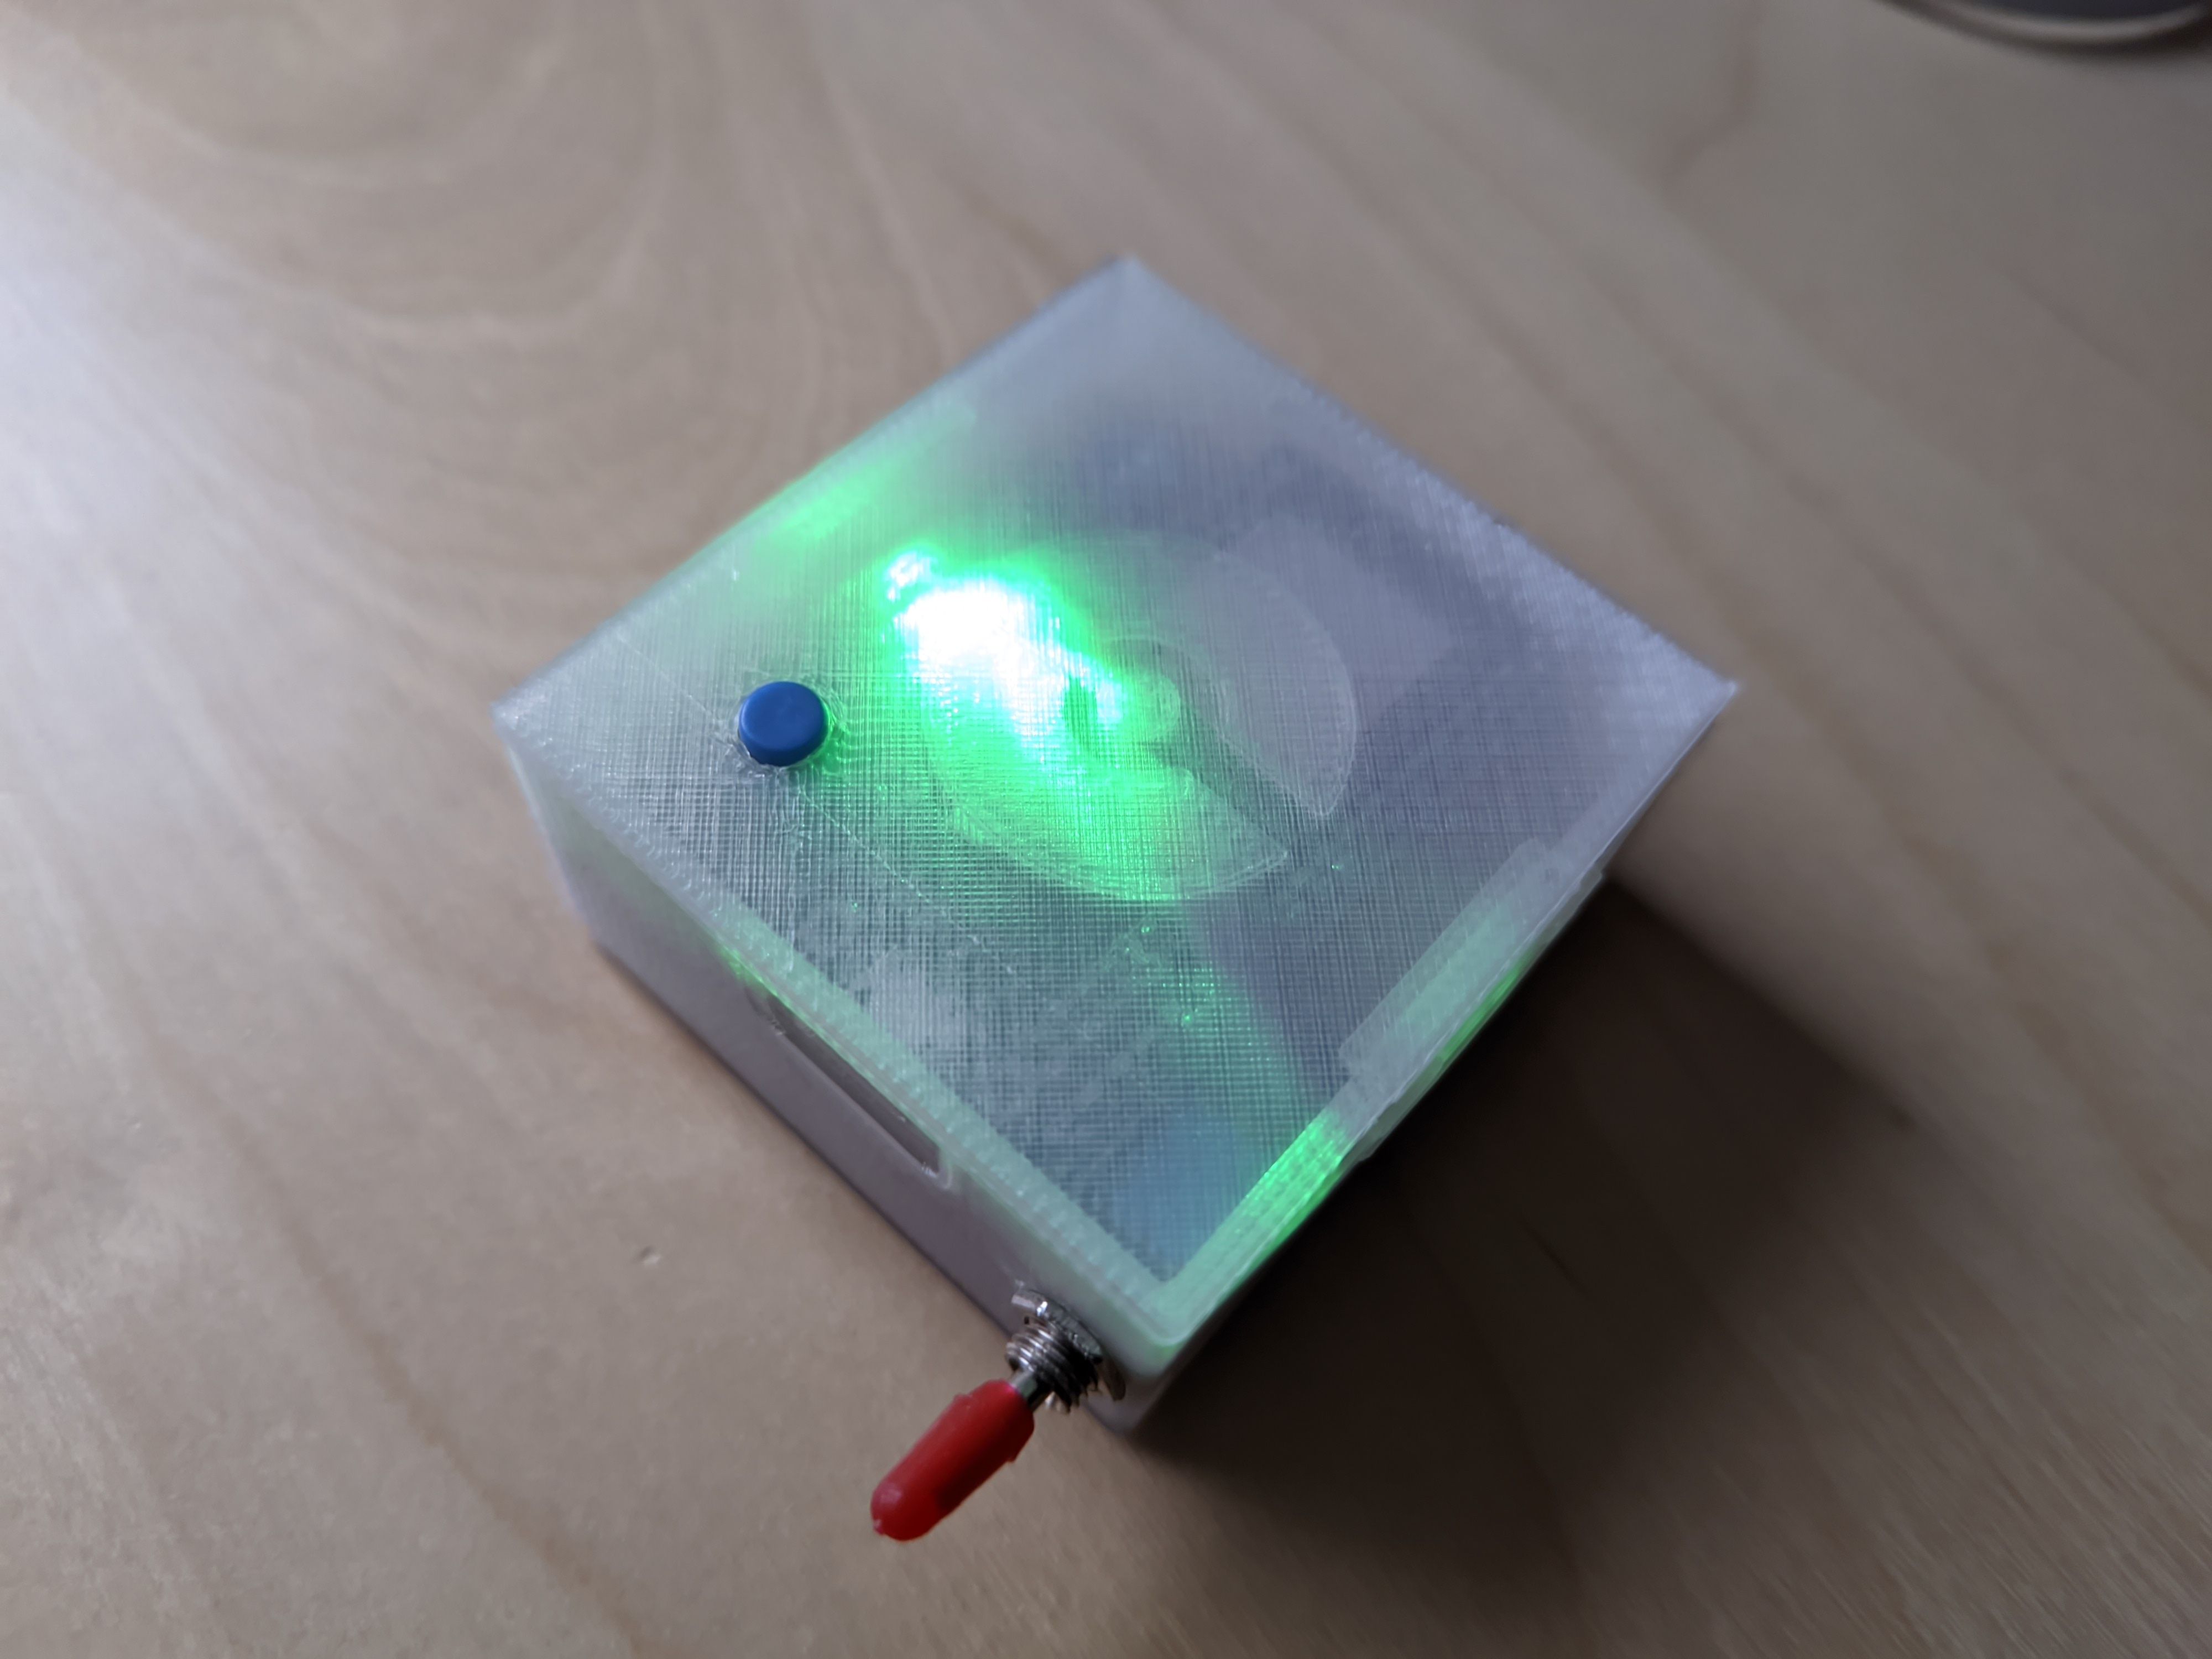 A 3D printed gadget with translucent plastic illuminated with a green LED